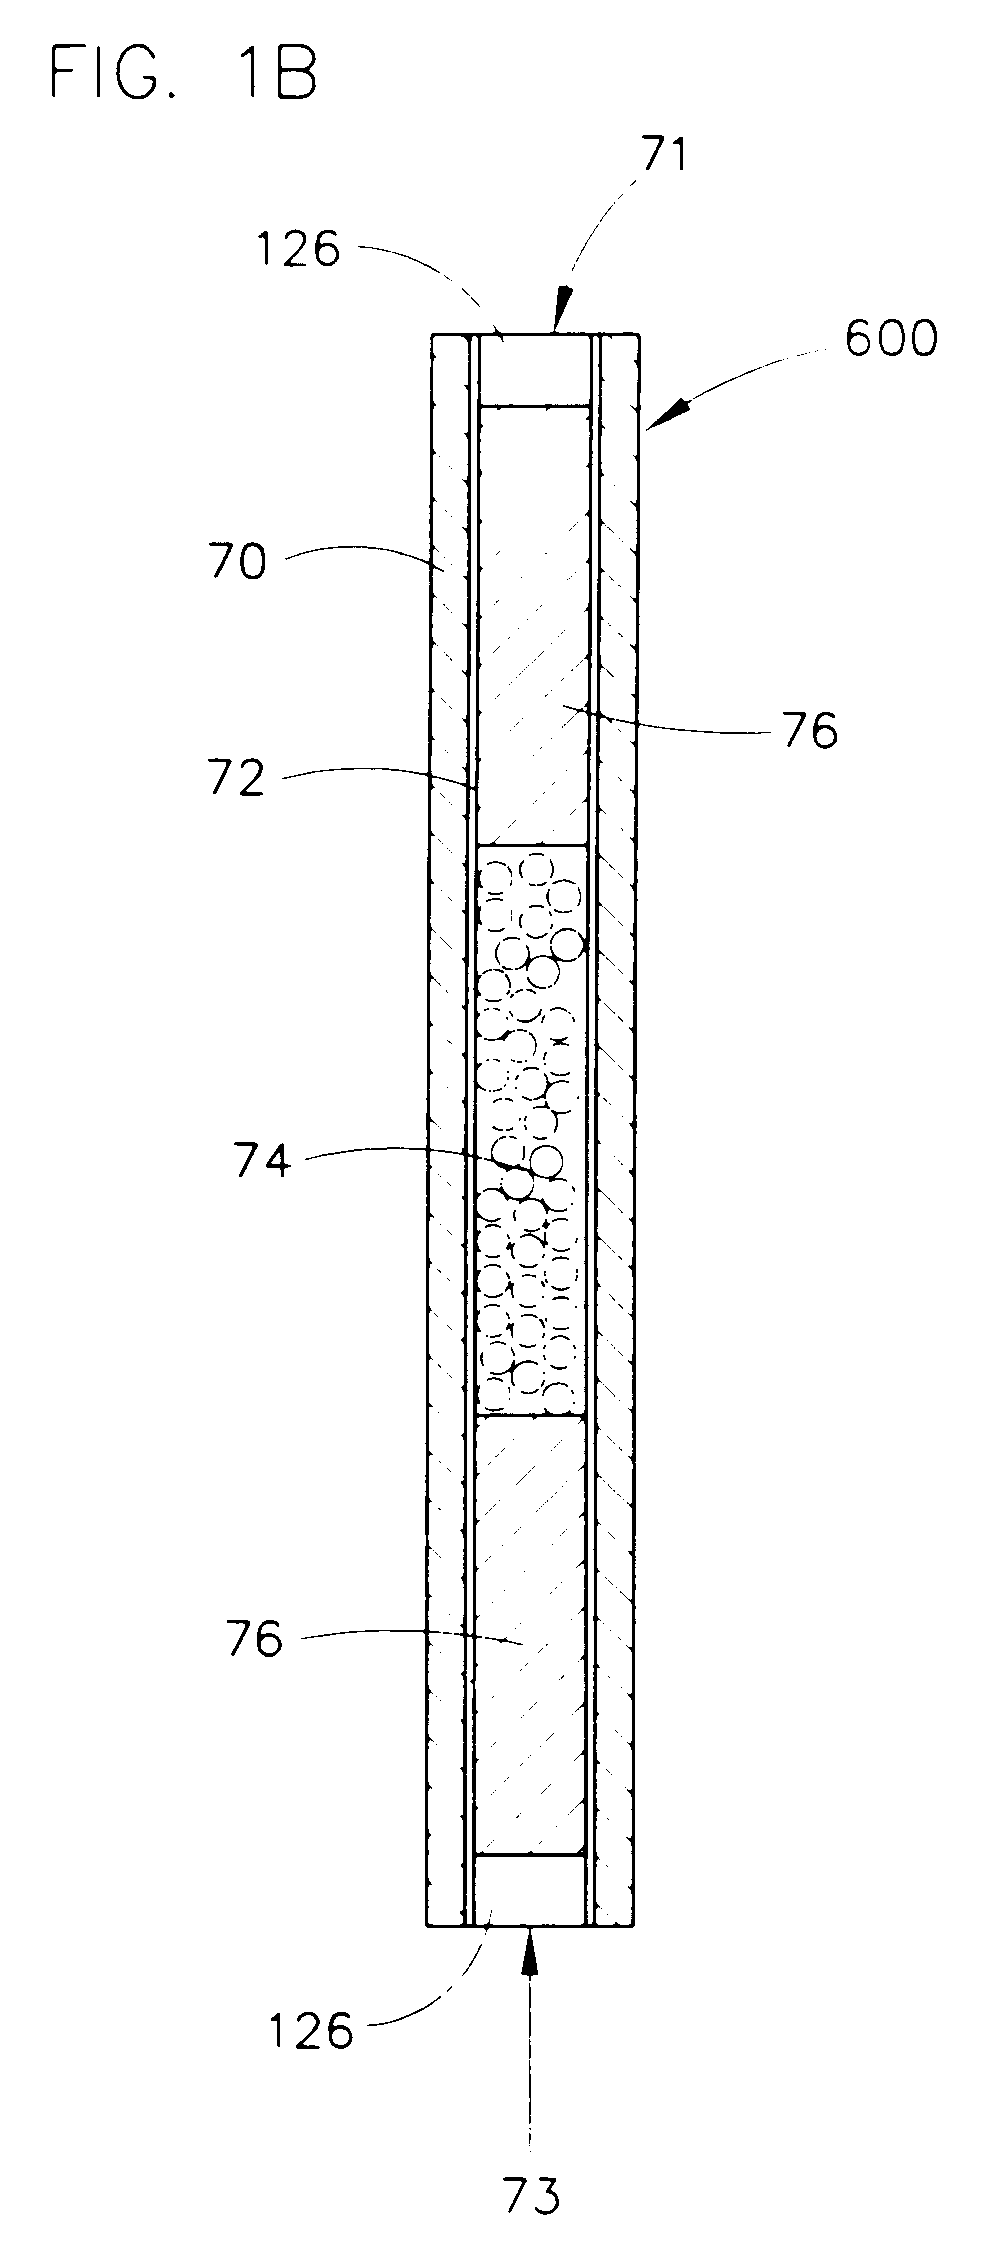 Parallel flow reactor having improved thermal control